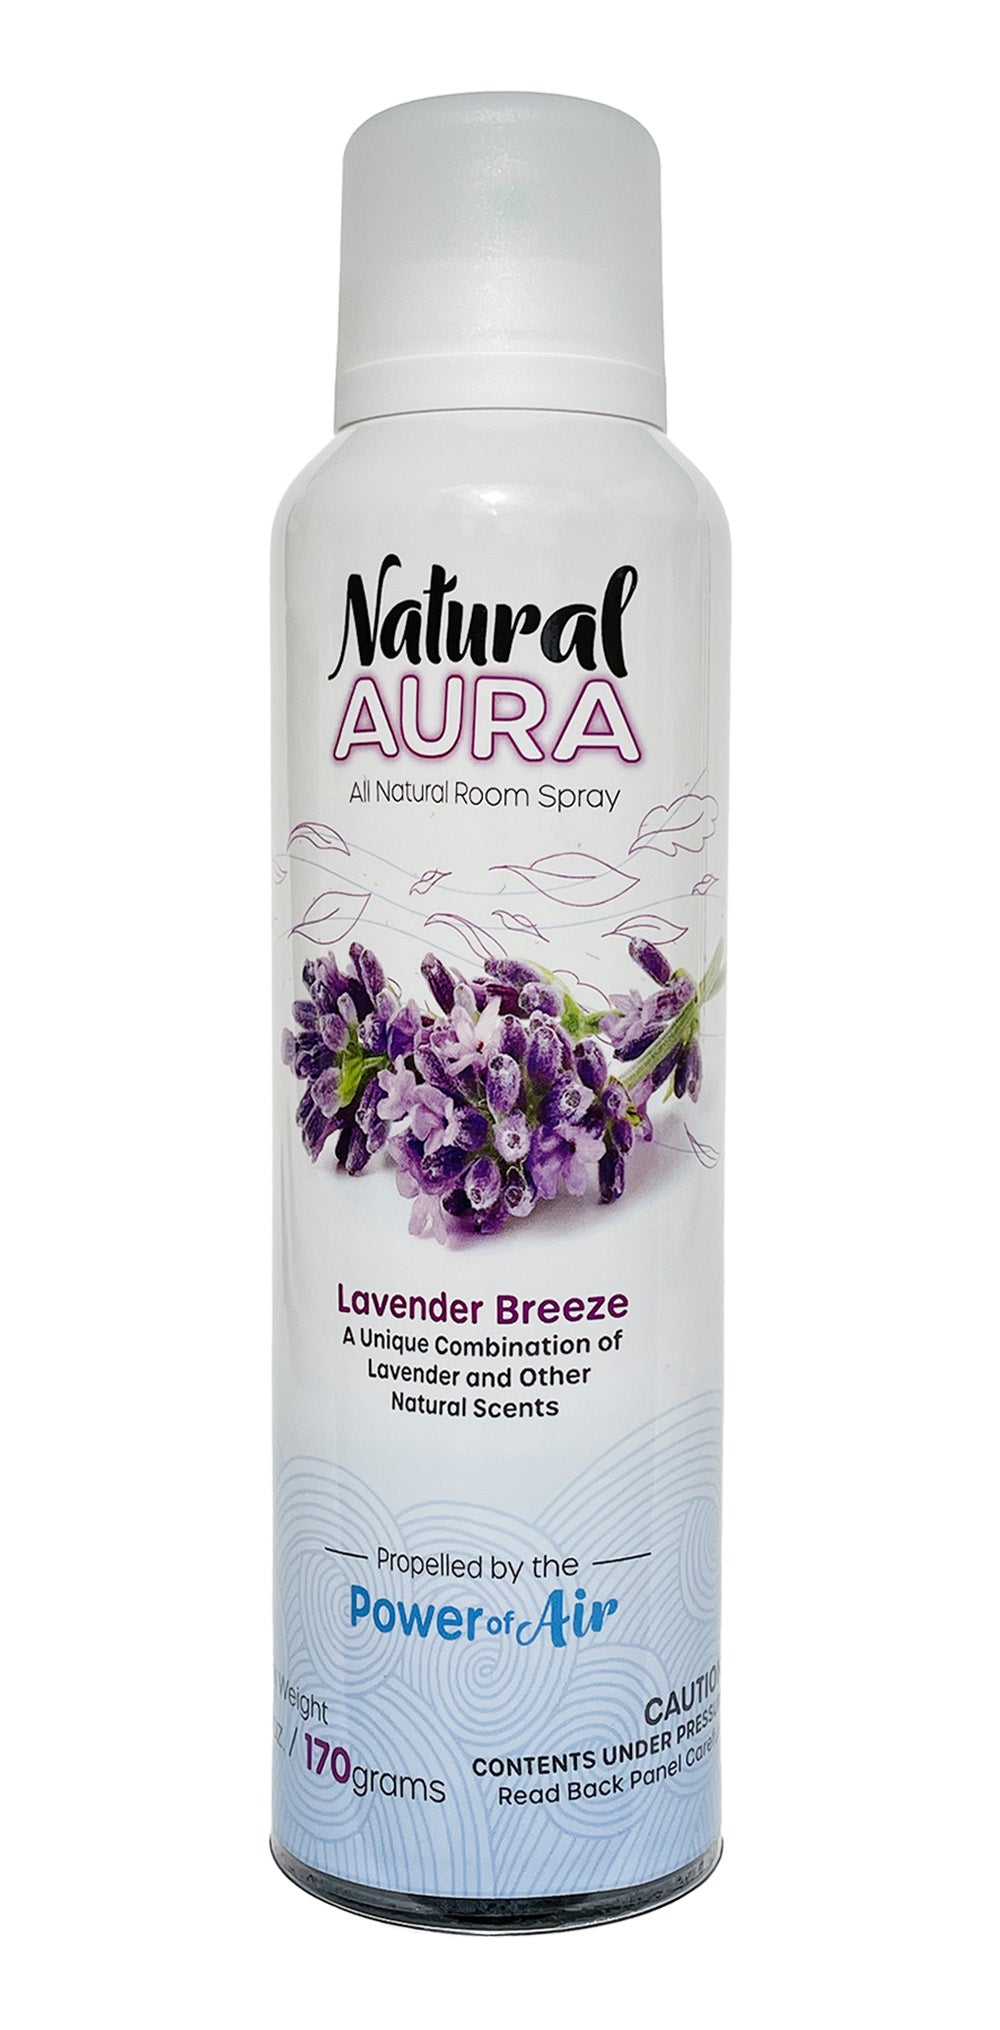 Front label of a bottle of Natural Aura Lavender Breeze Room Spray on a white background.